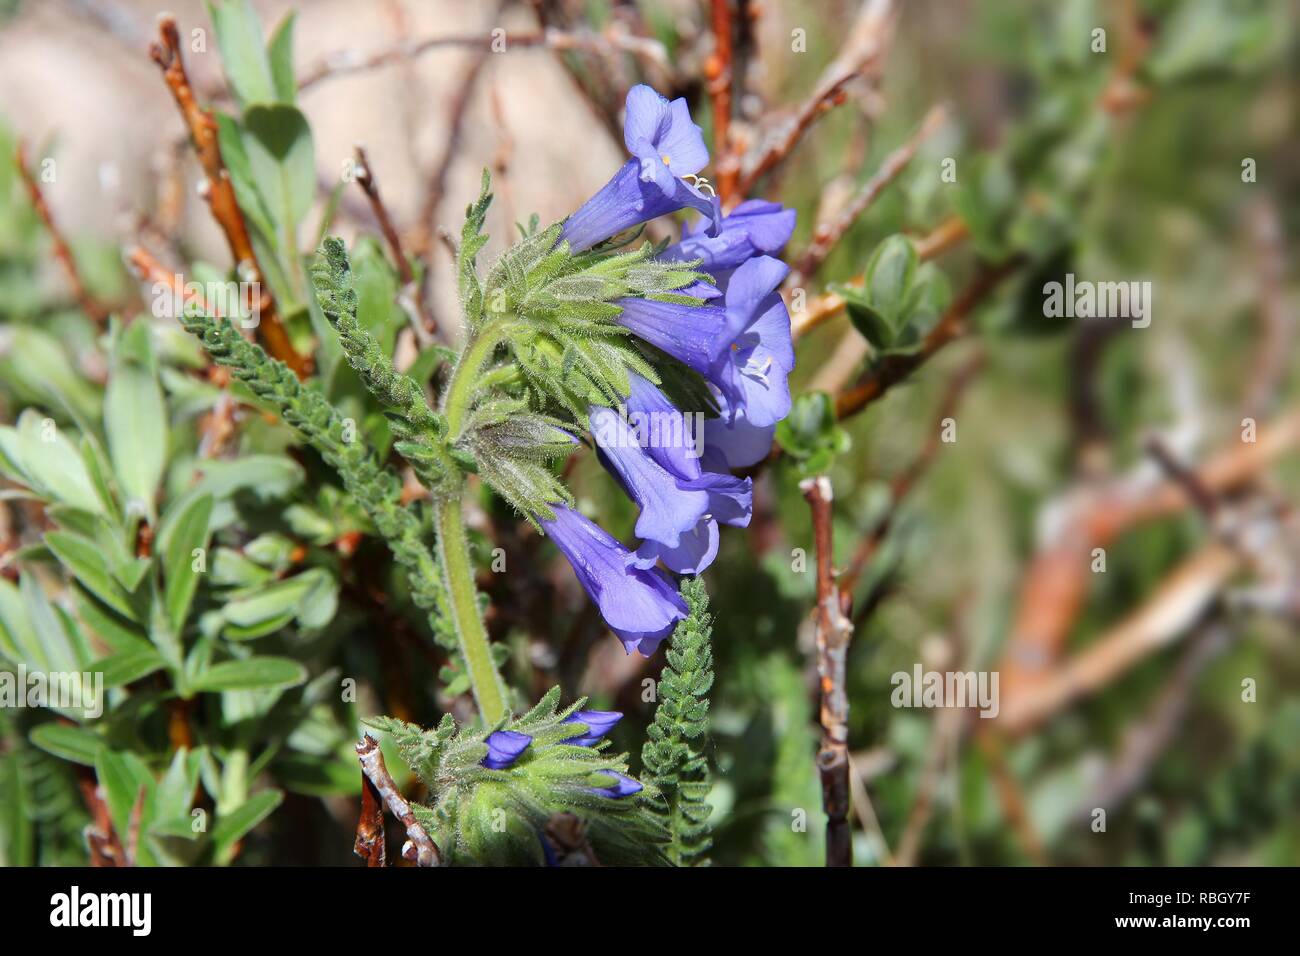 Nature in Rocky Mountain National Park in Colorado, USA. Wildflowers of sky pilot (Polemonium viscosum) species, also known as skunkweed. Stock Photo